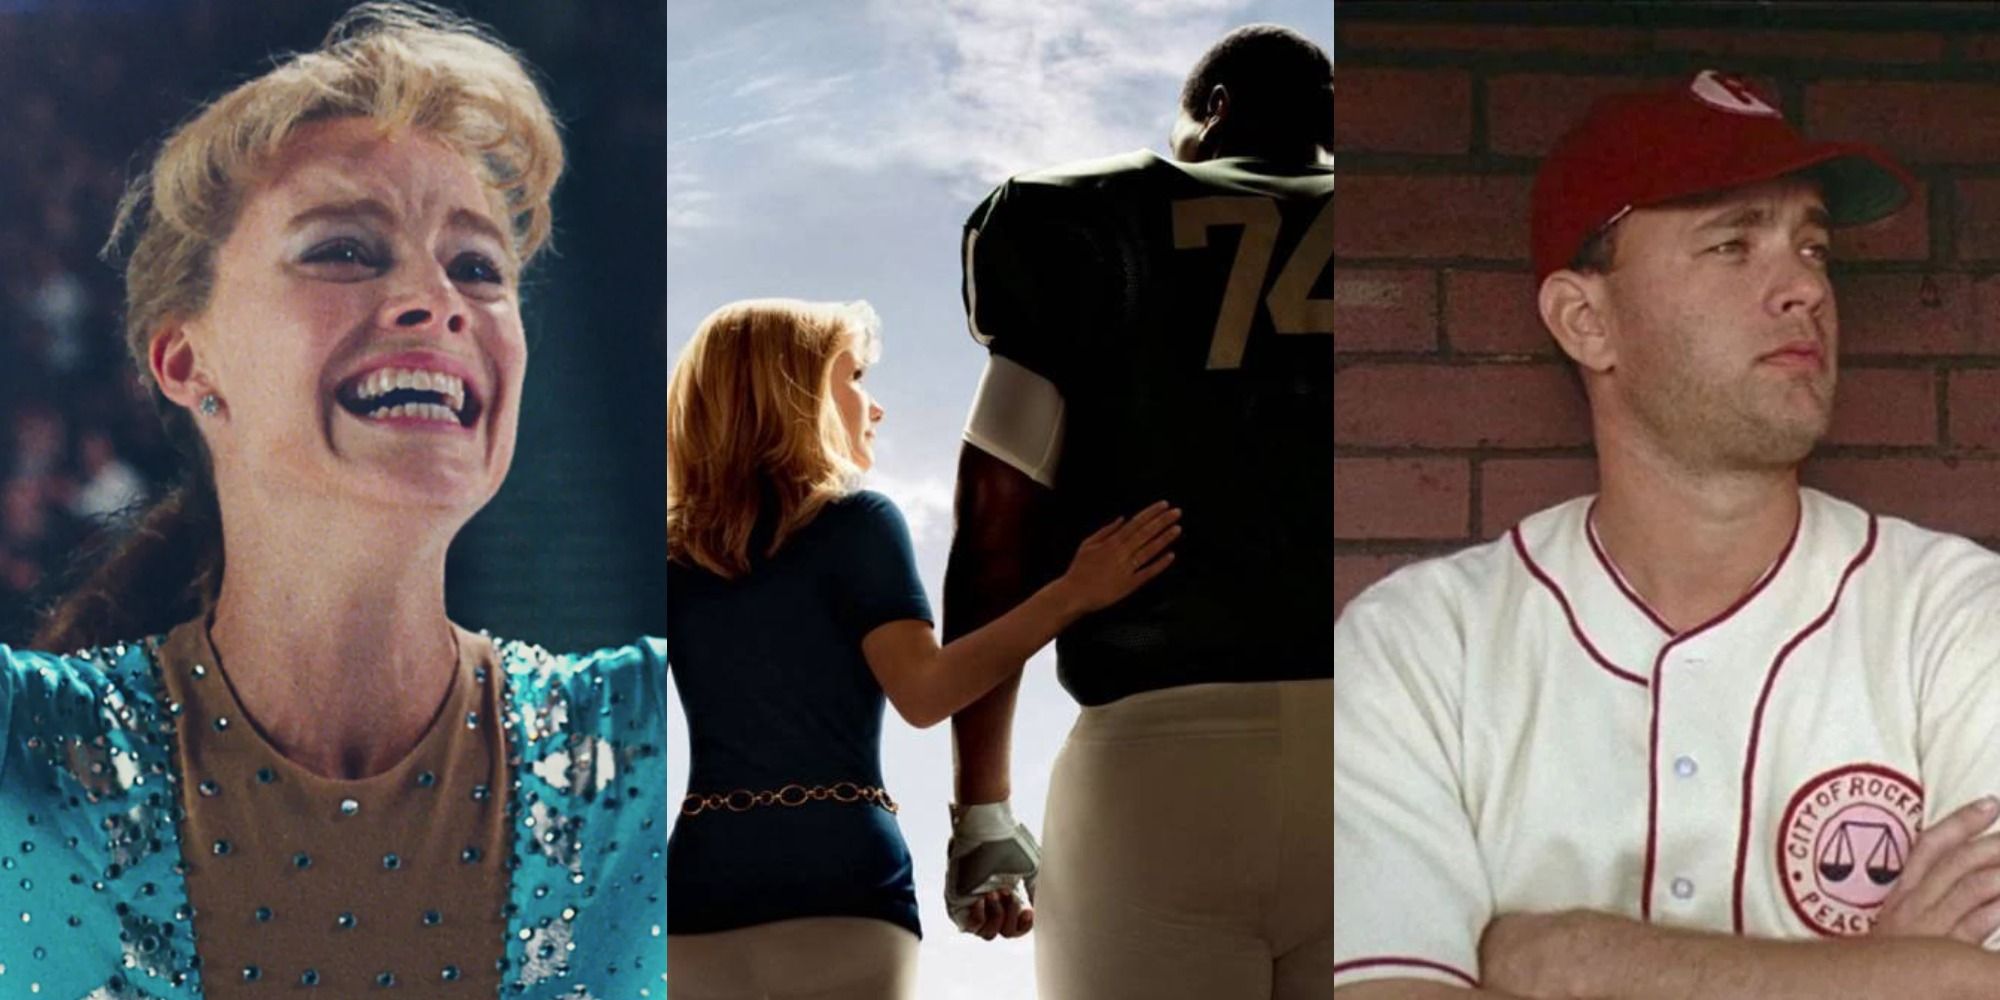 Stills from I, Tonya, The Blind Side, and A League of Their Own